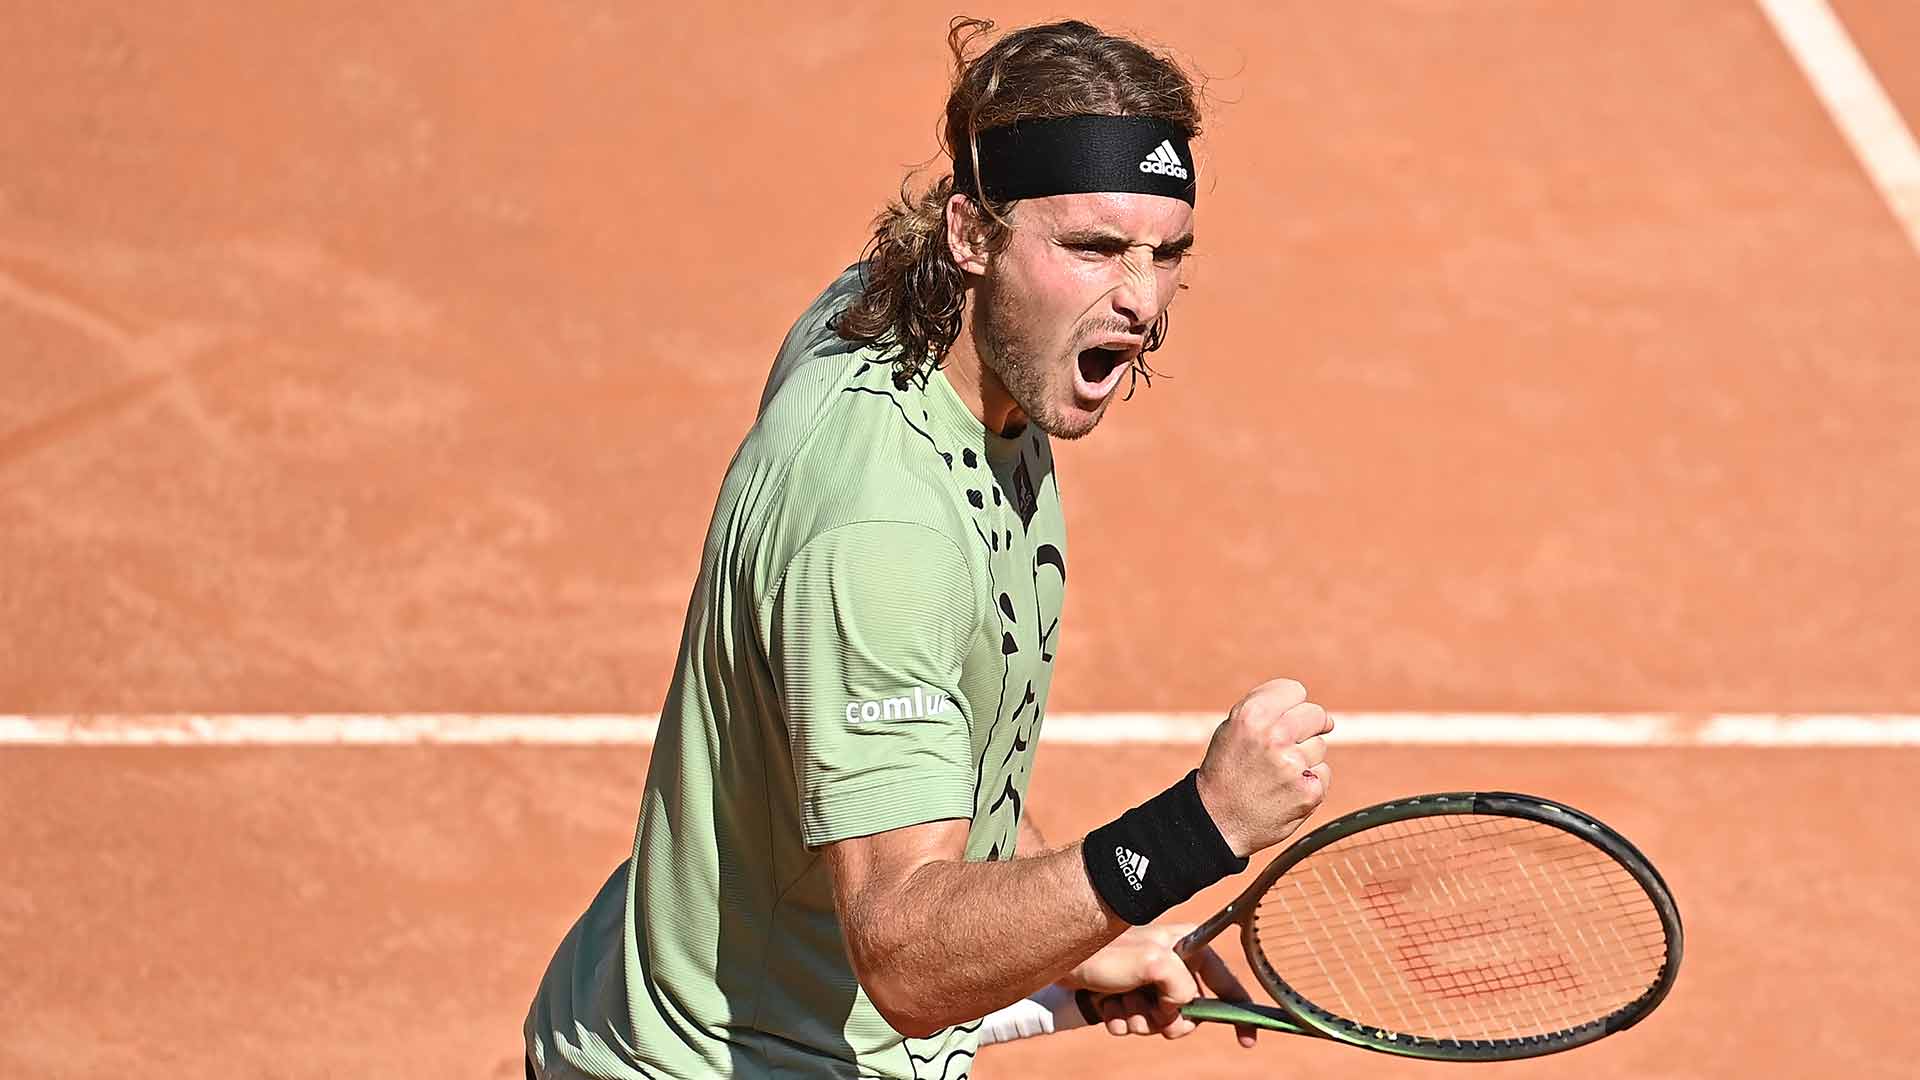 Italian Open Semi-finals LIVE: Stefanos Tsitsipas clinches come-from-behind victory over Alexander Zverev to enter Italian Open final